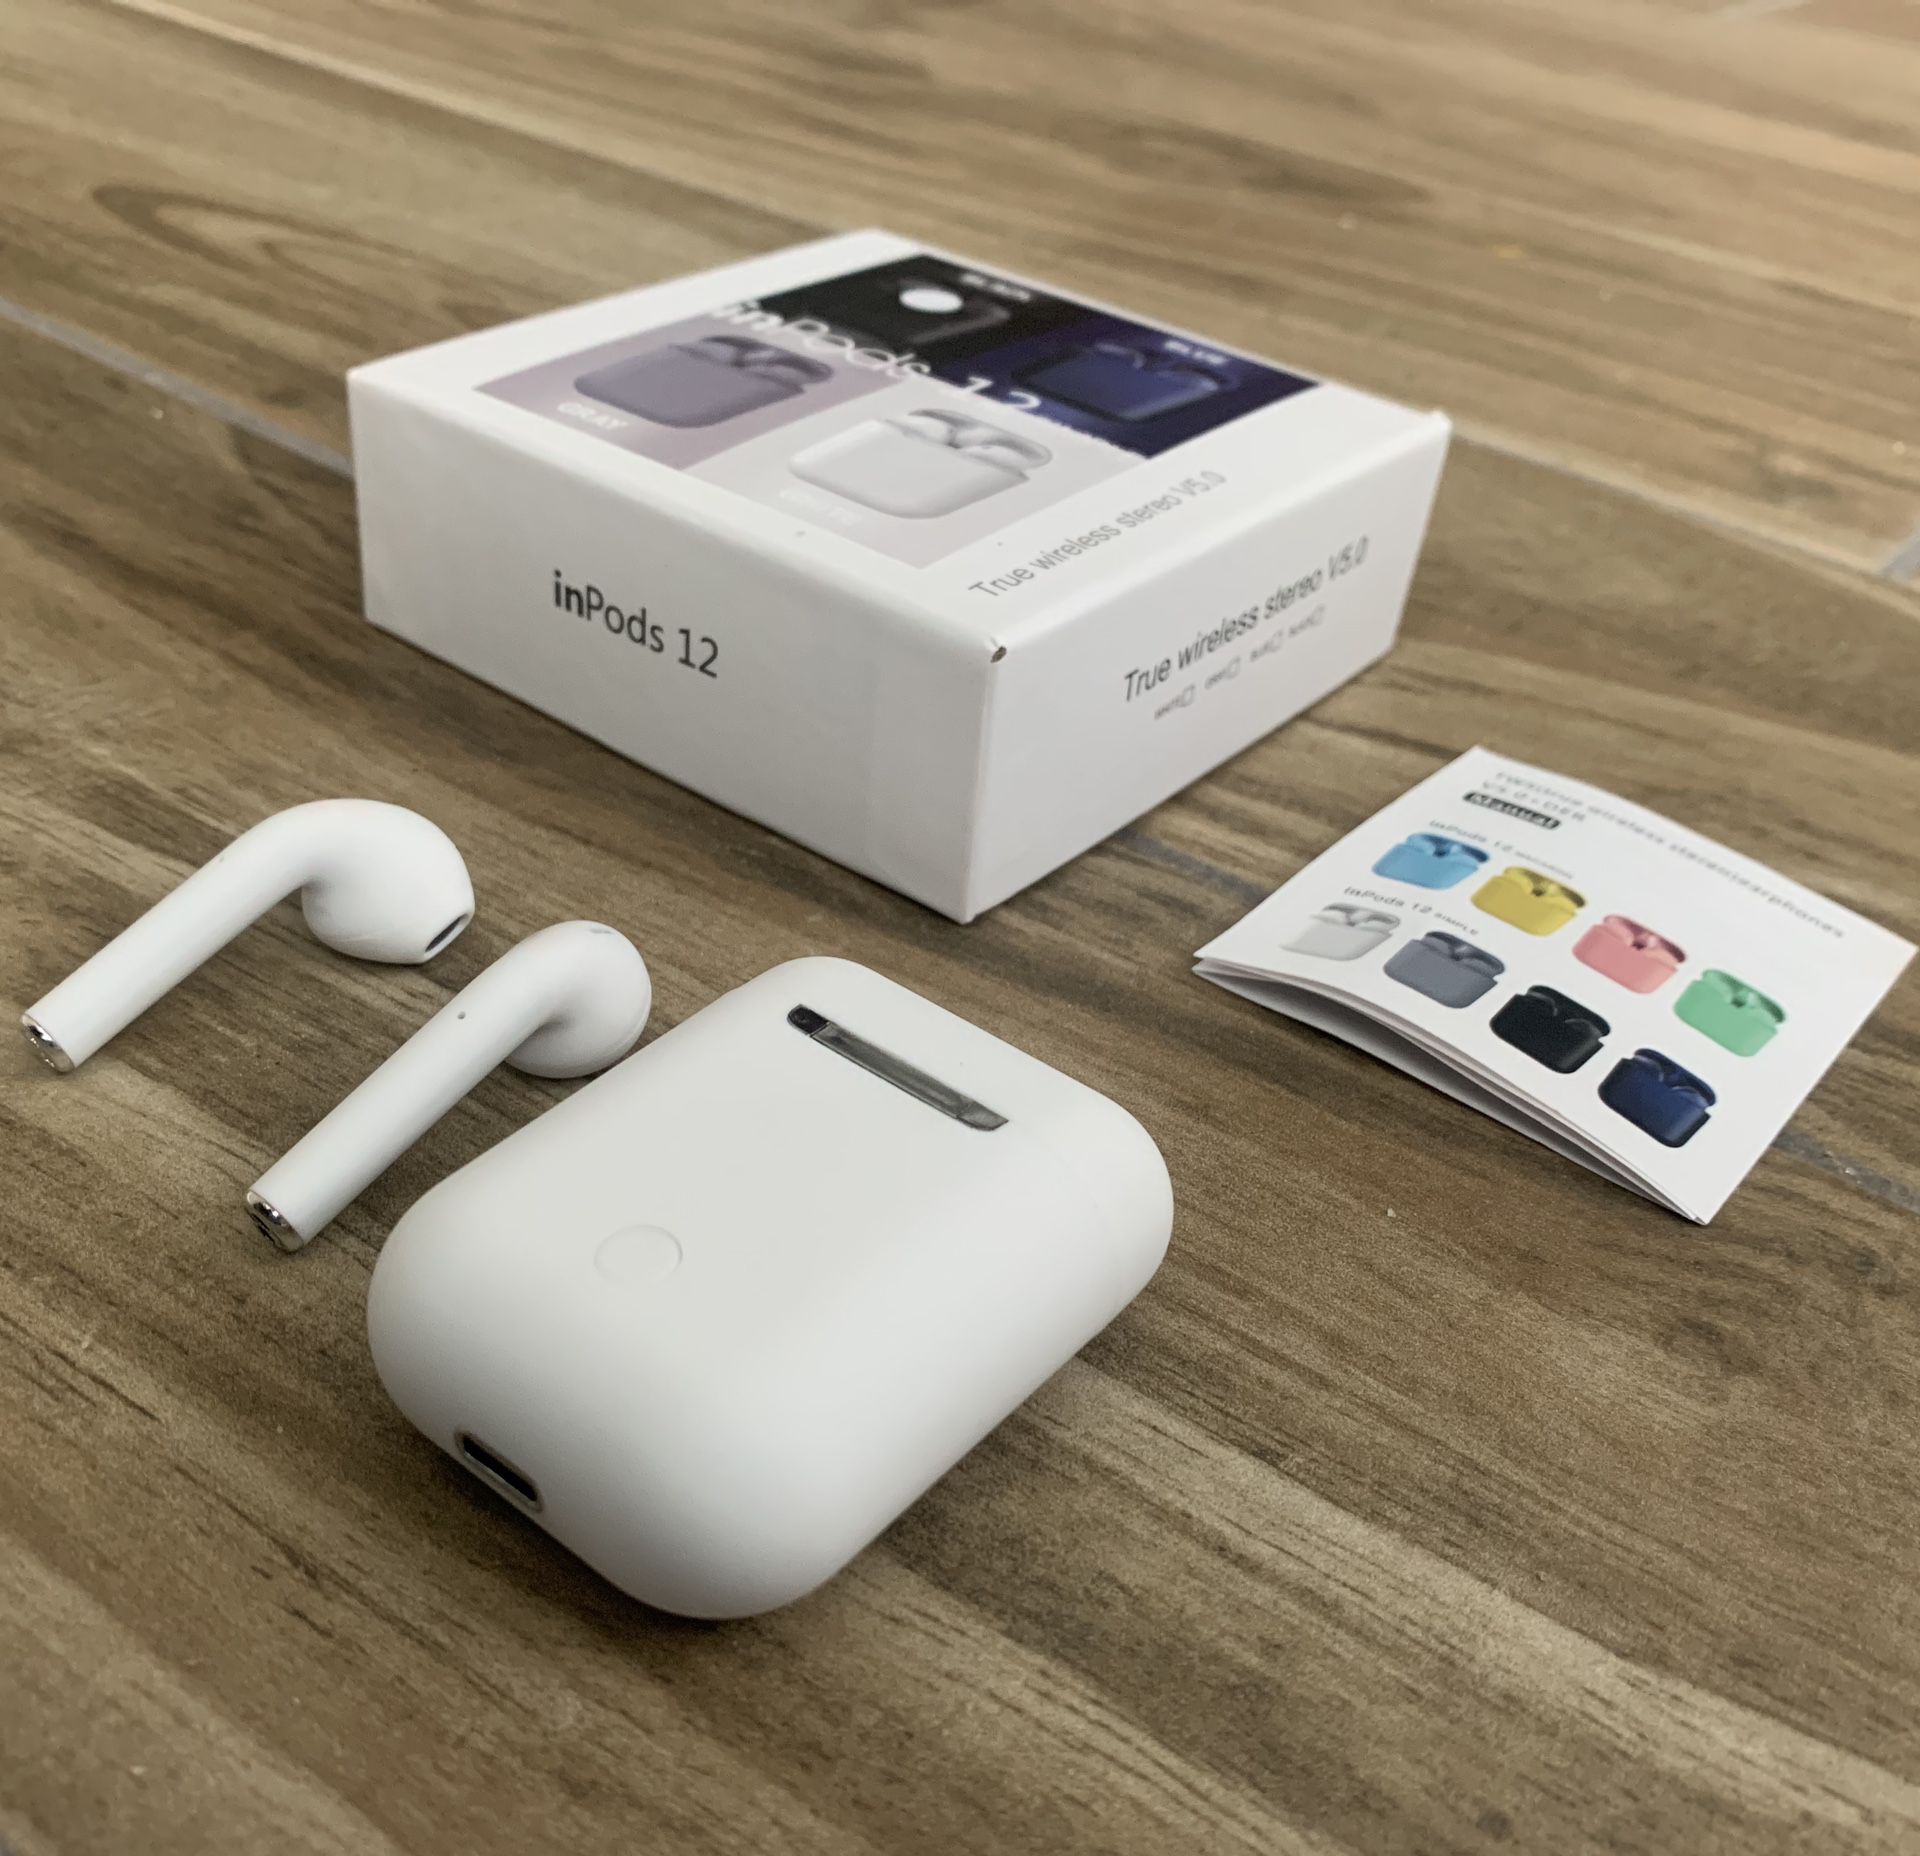 White inpod 12 very similar to AirPods. Buy 1 for 15$ or 2 for 25$. More colors available